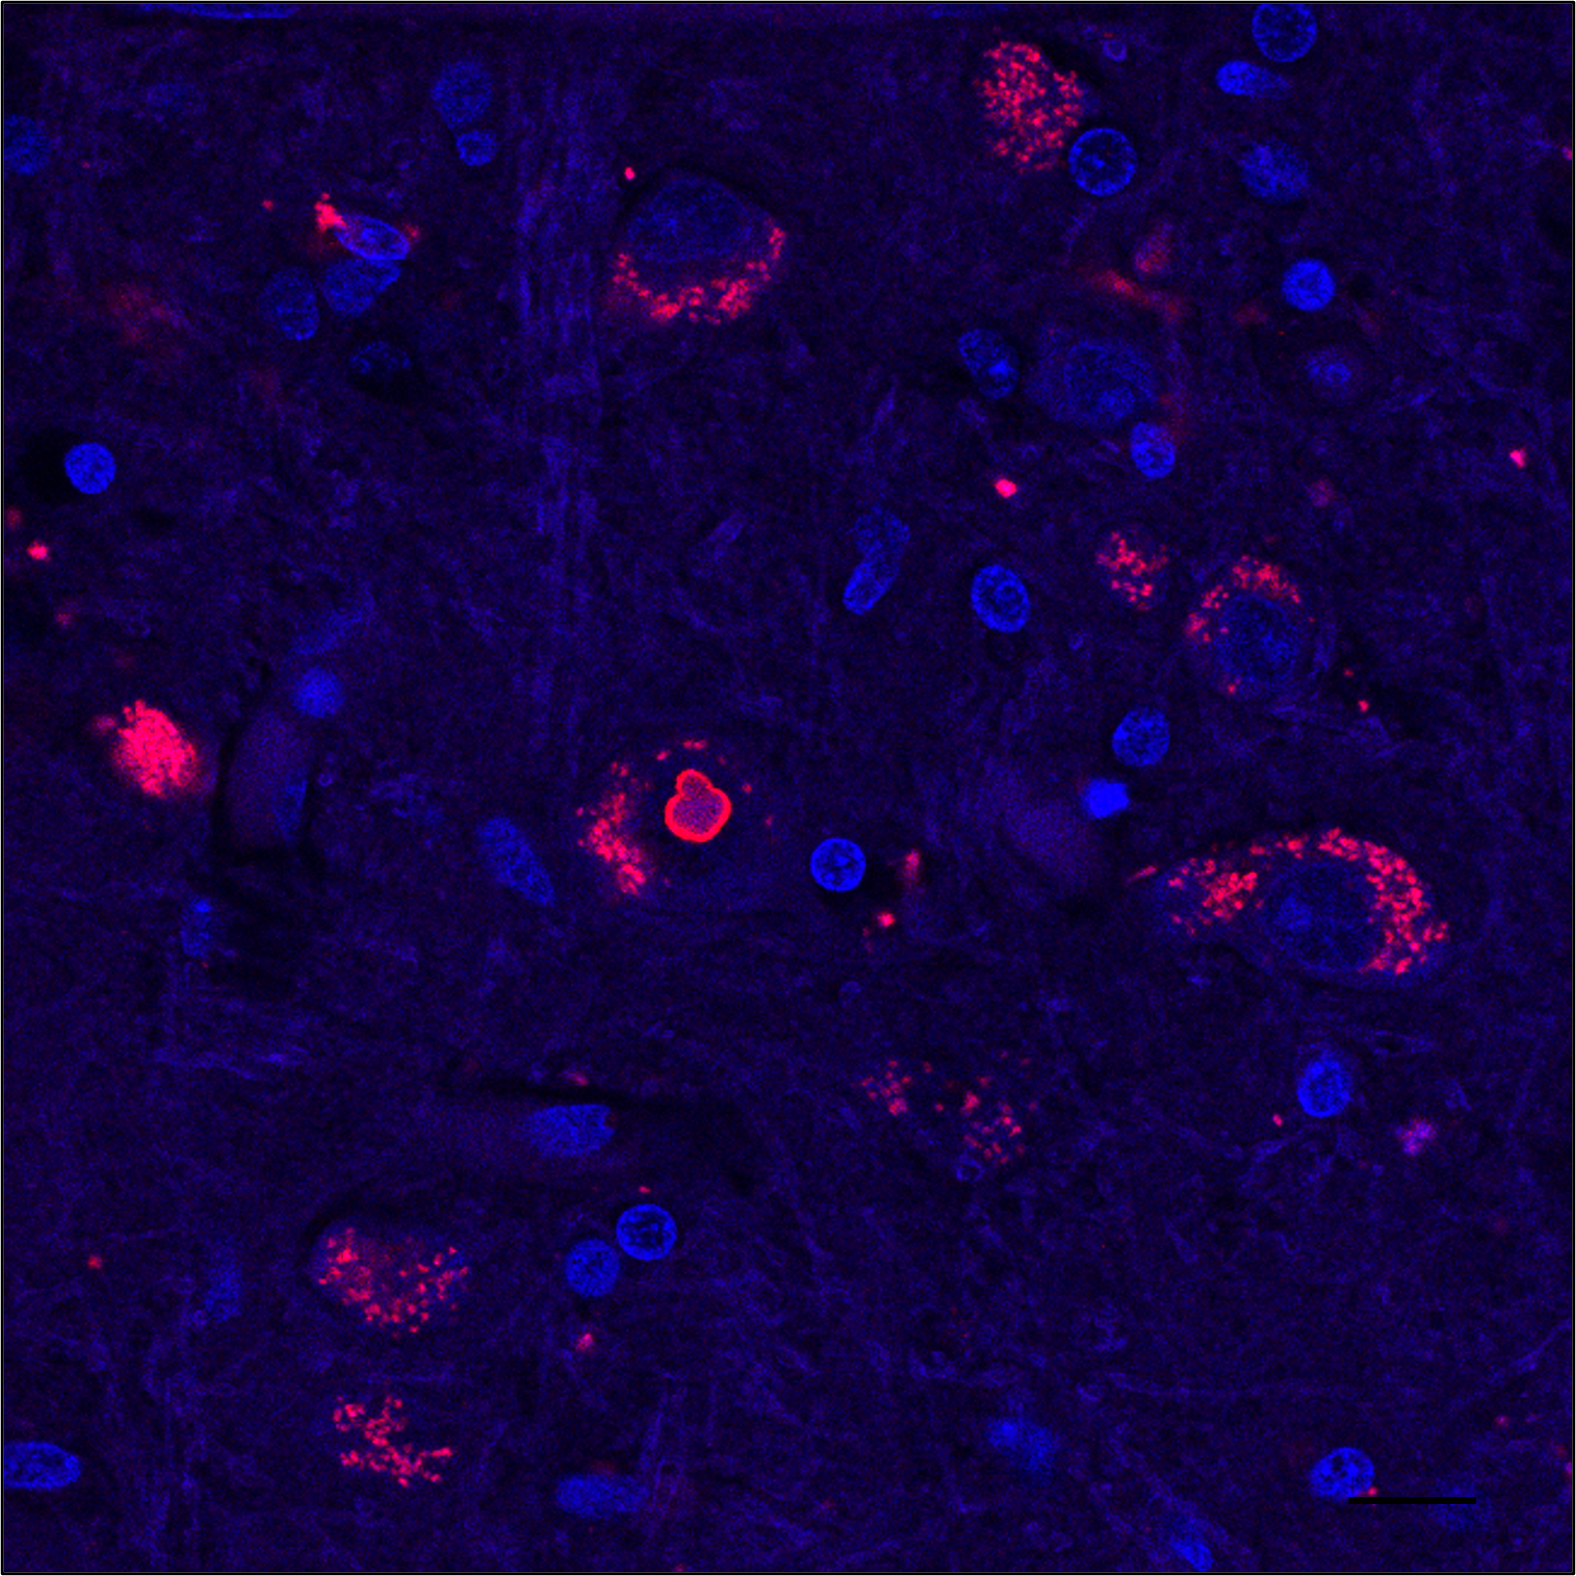 Microscope image of brain tissue showing fluorescent blue cells and red protein speckles on a black background.